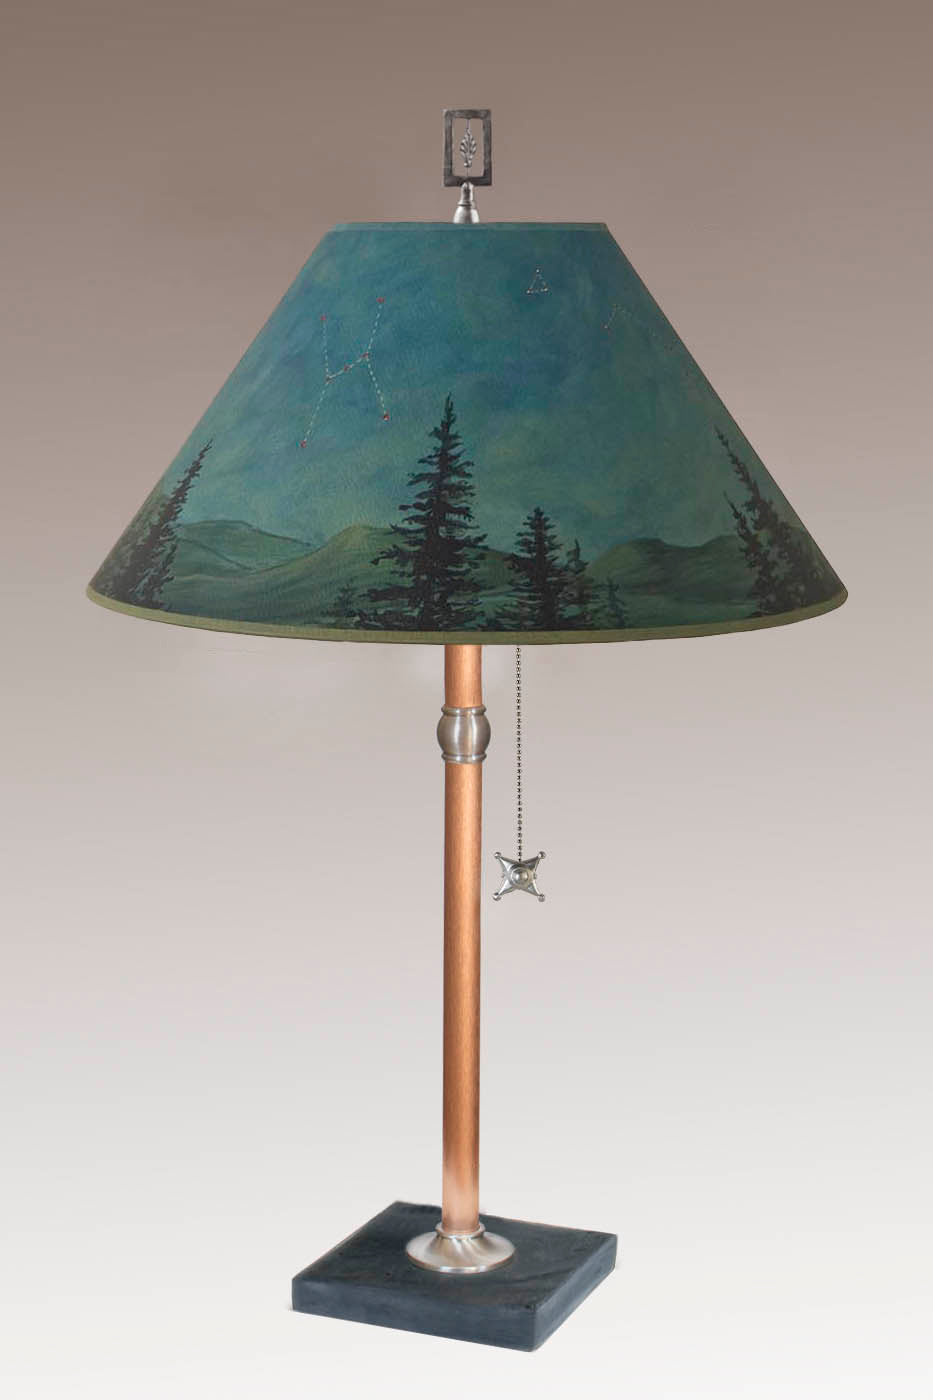 Janna Ugone &amp; Co Table Lamp Copper Table Lamp with Large Conical Shade in Midnight Sky